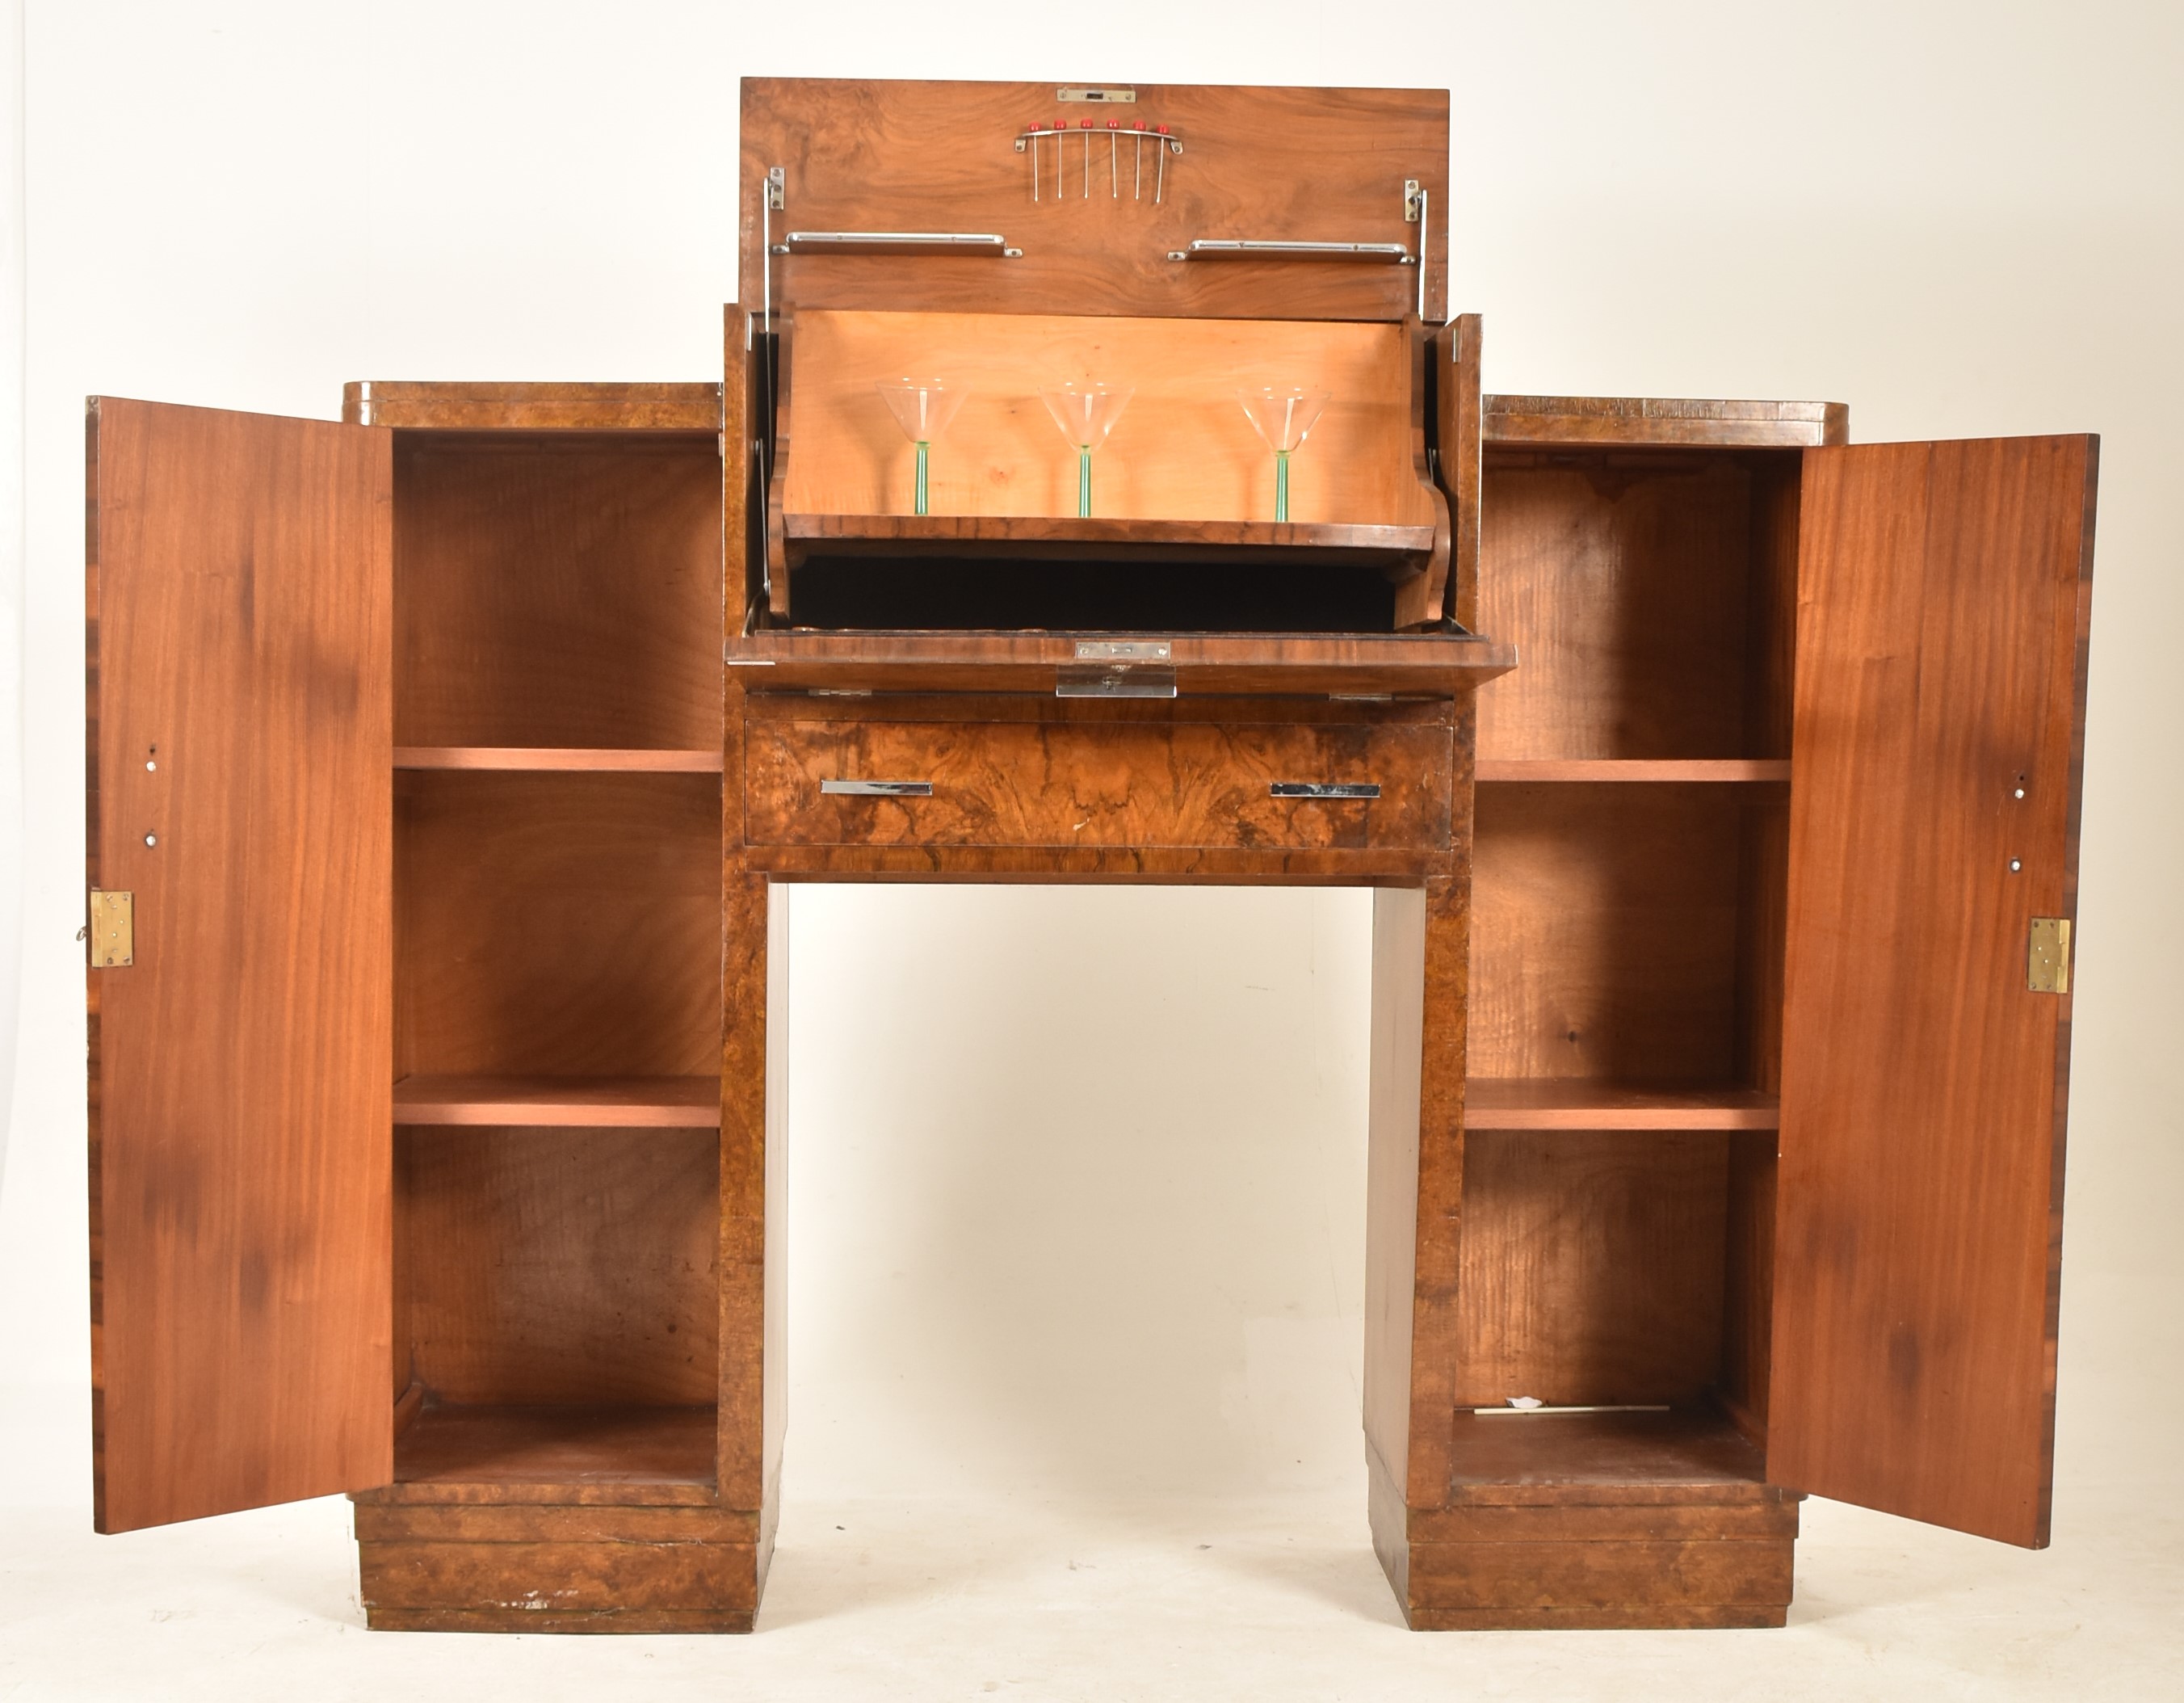 ART DECO 1930S BURR WALNUT FALL FRONT COCKTAIL CABINET - Image 2 of 7